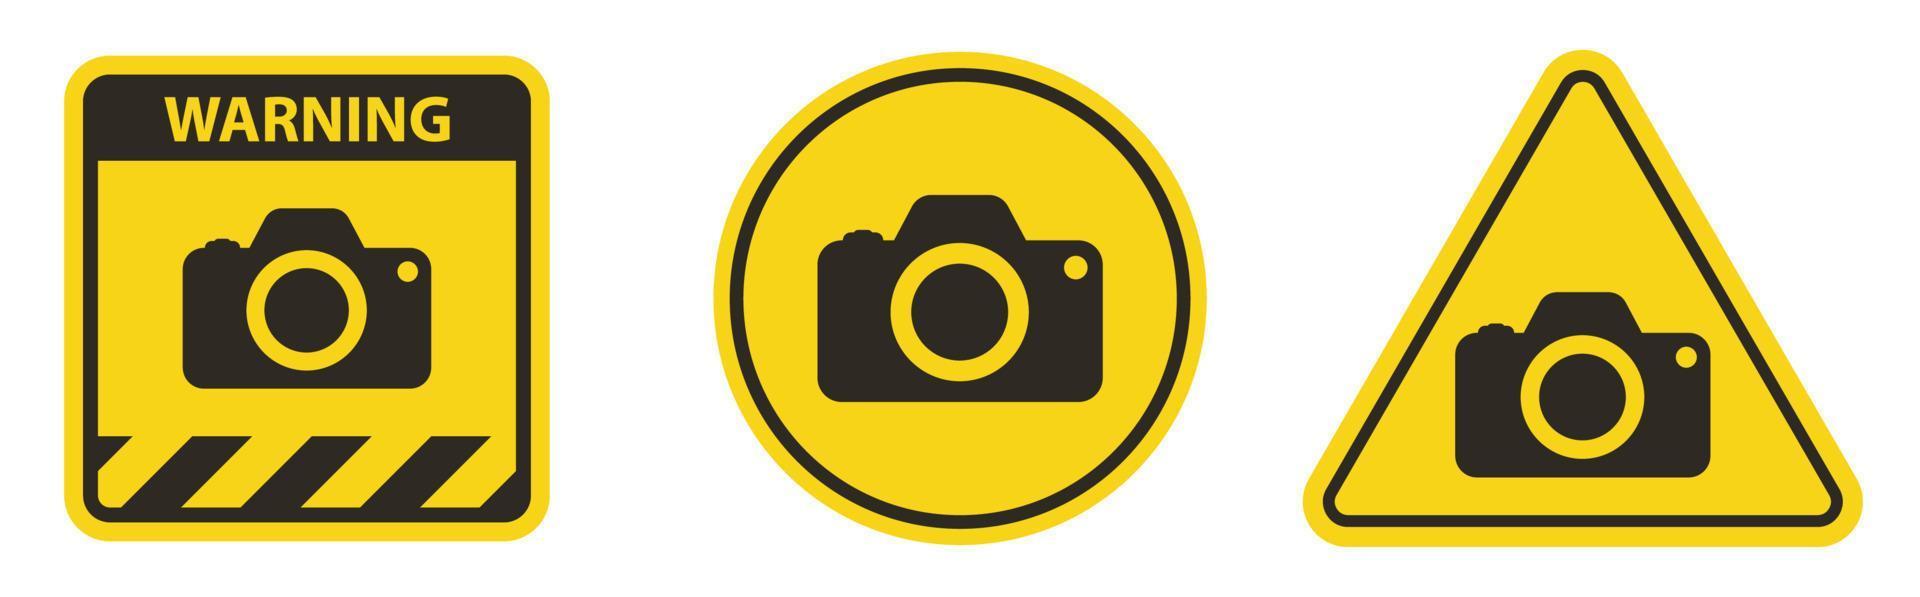 Camera Icon Symbol Sign Isolate on White Background,Vector Illustration EPS.10 vector